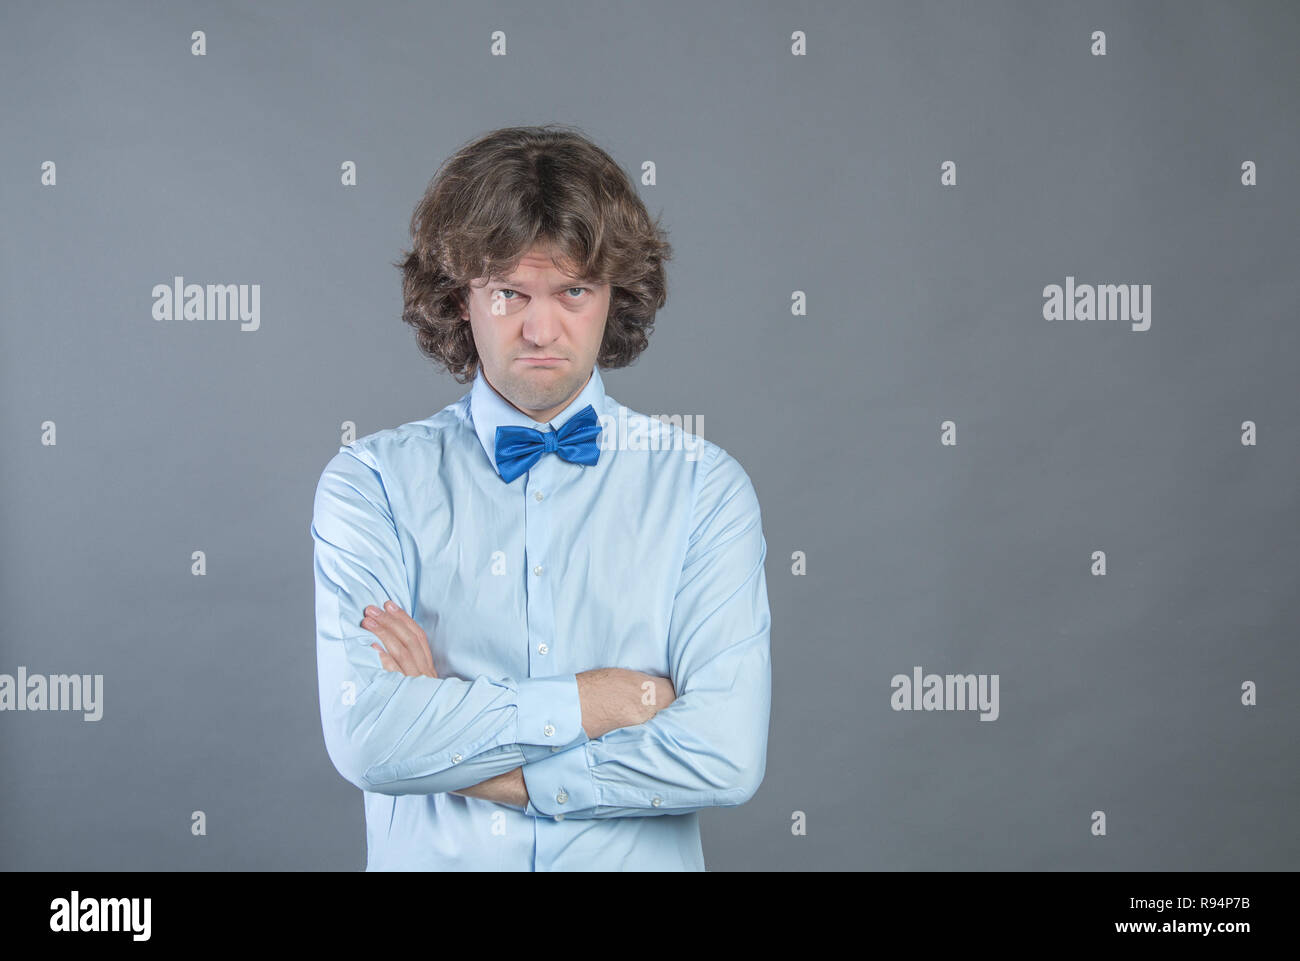 Resentful man with arms folded over gray background in studio shot and offended looked at camera. Angry grumpy guy looking very displeased. Negative h Stock Photo